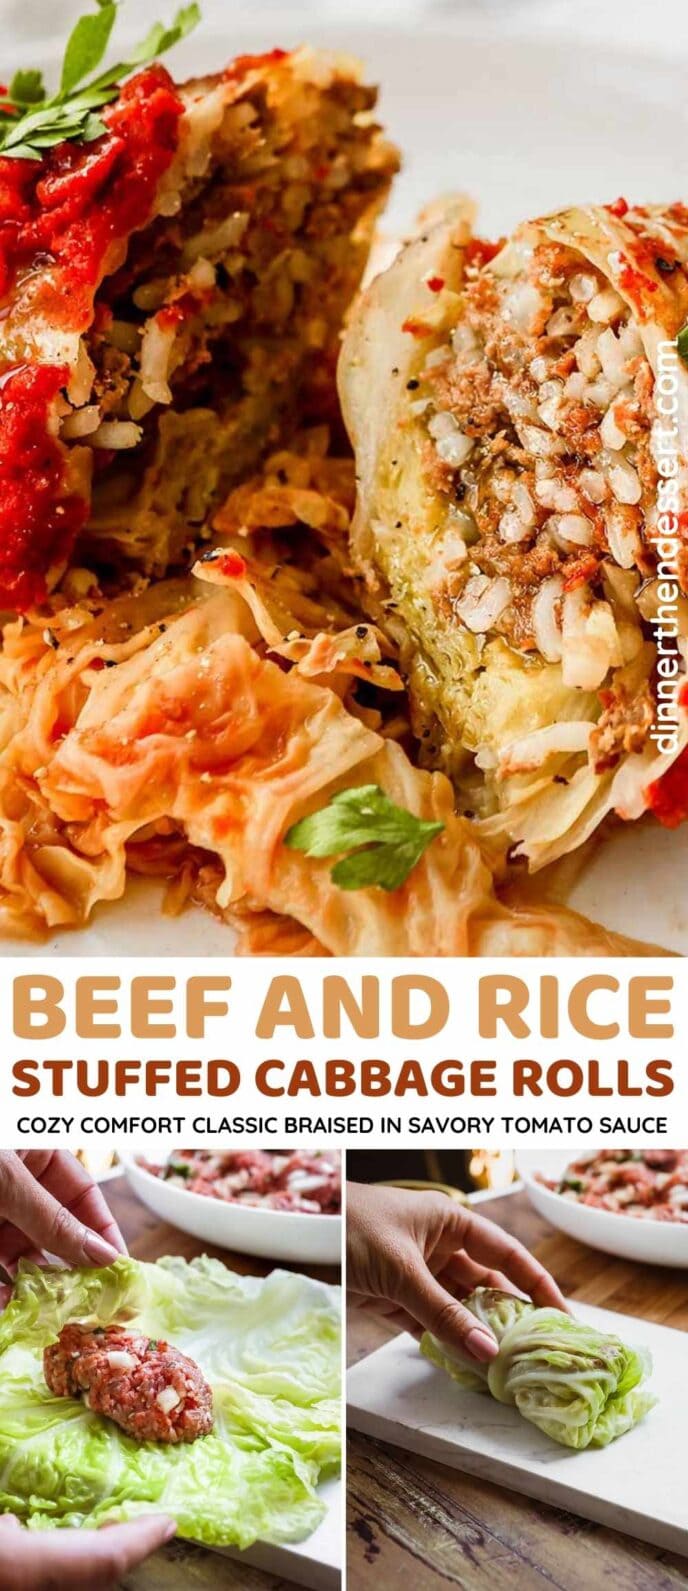 Beef and Rice Stuffed Cabbage Rolls Collage